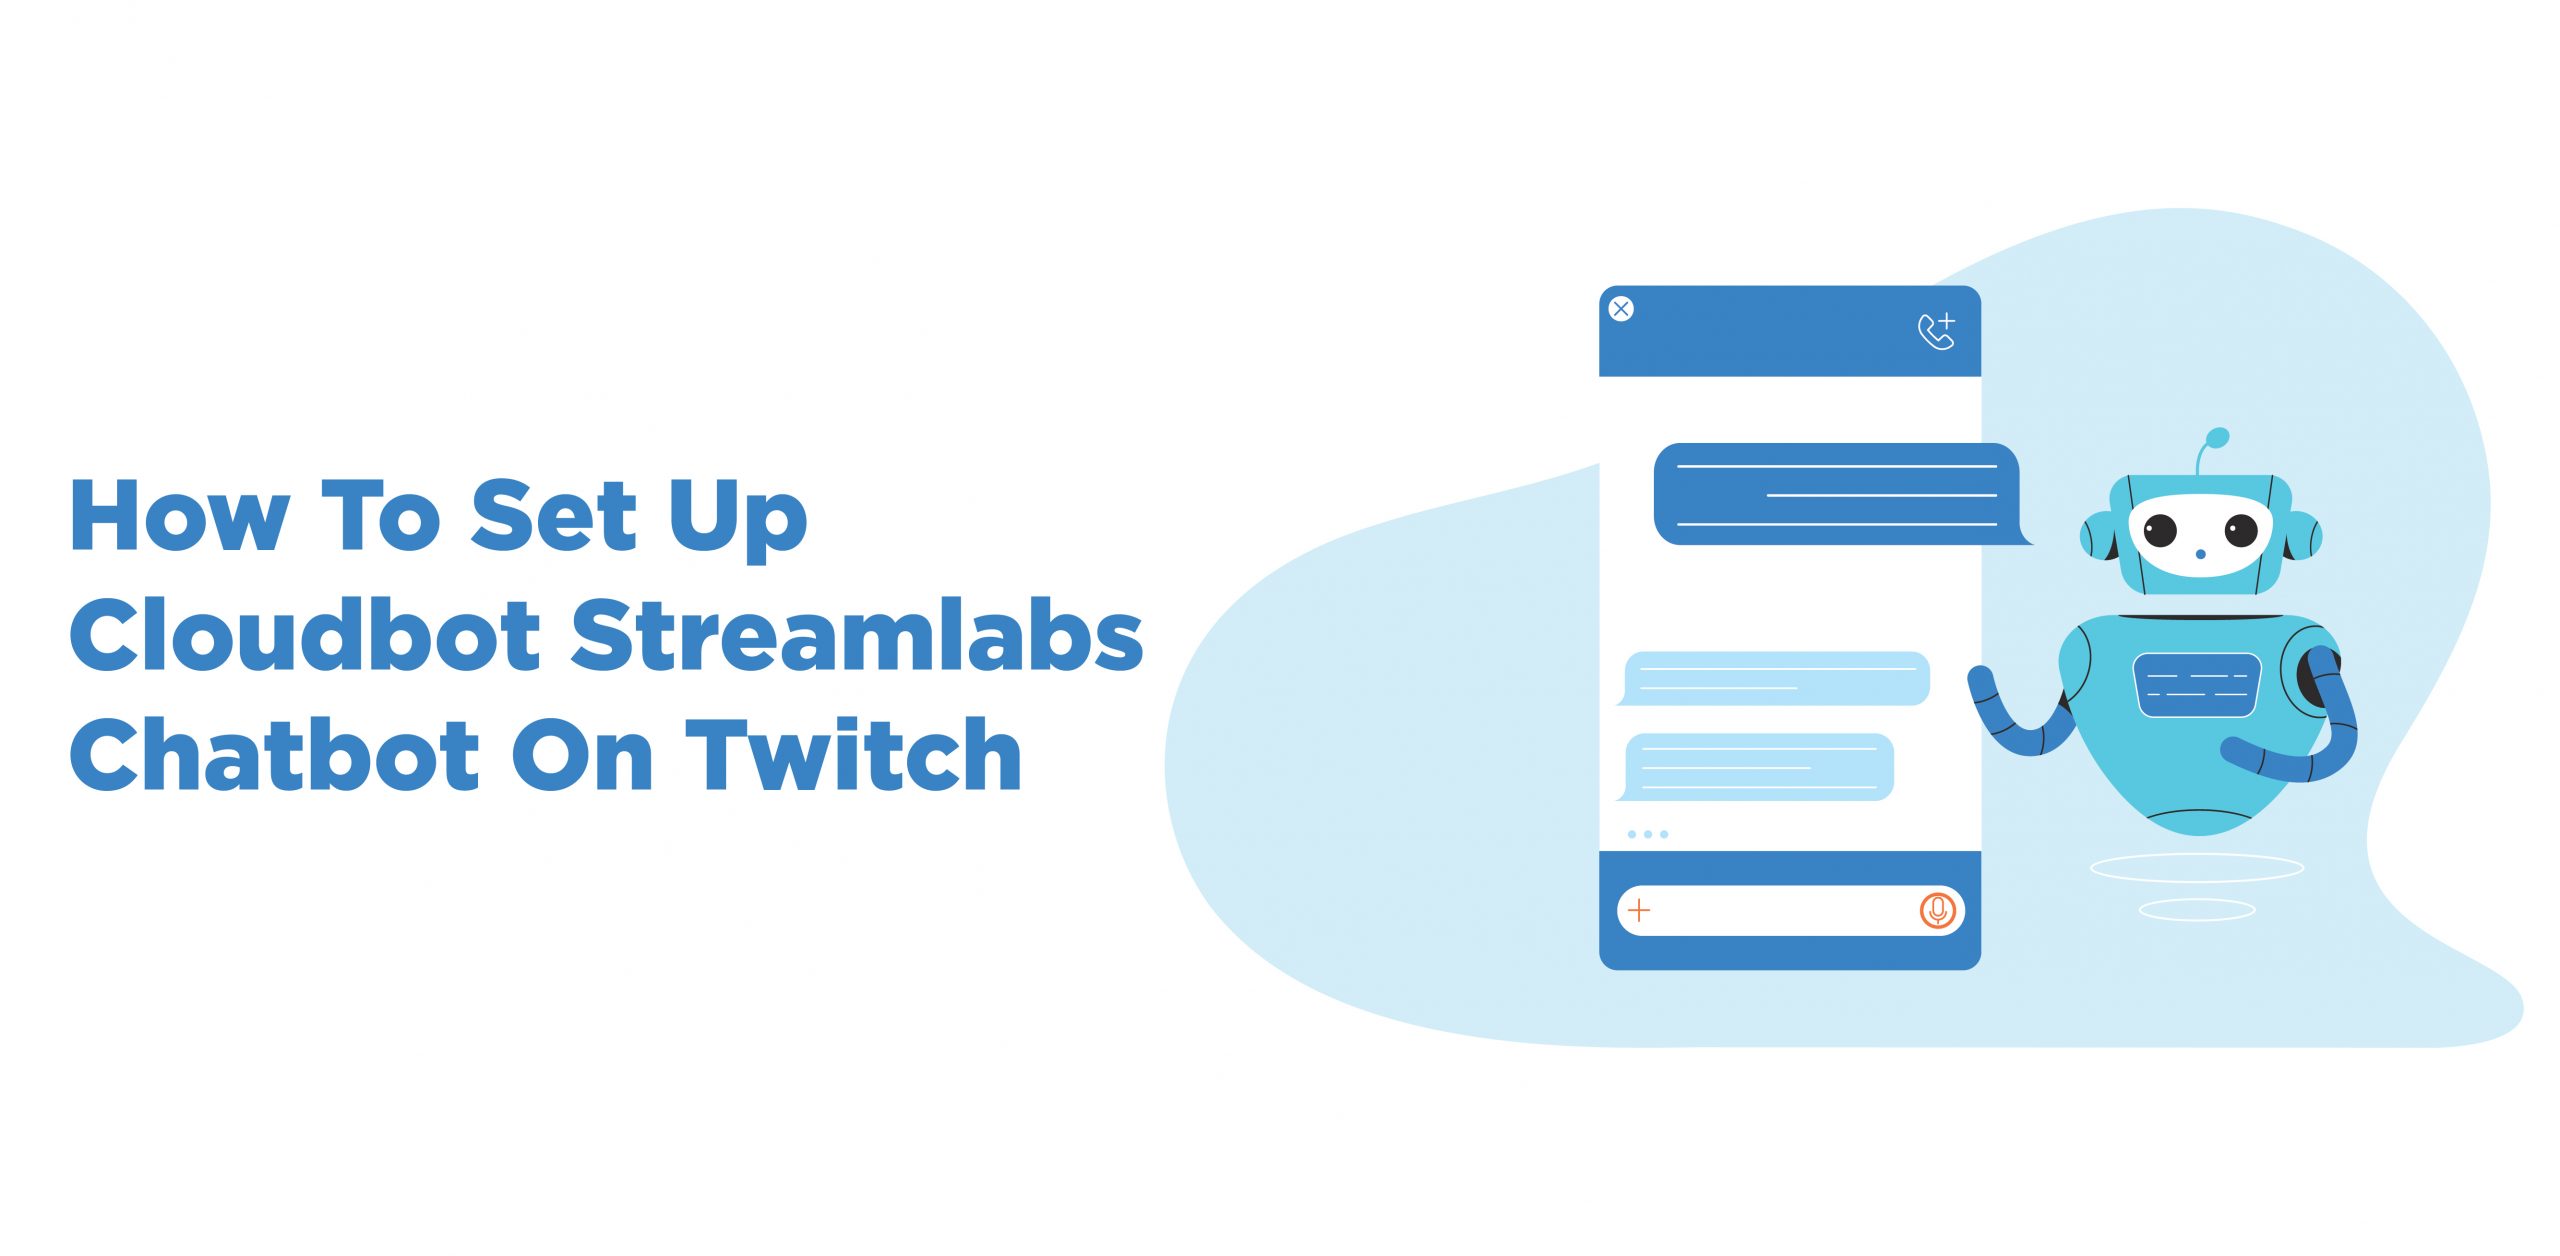 How To Set Up Cloudbot Streamlabs Chatbot On Twitch